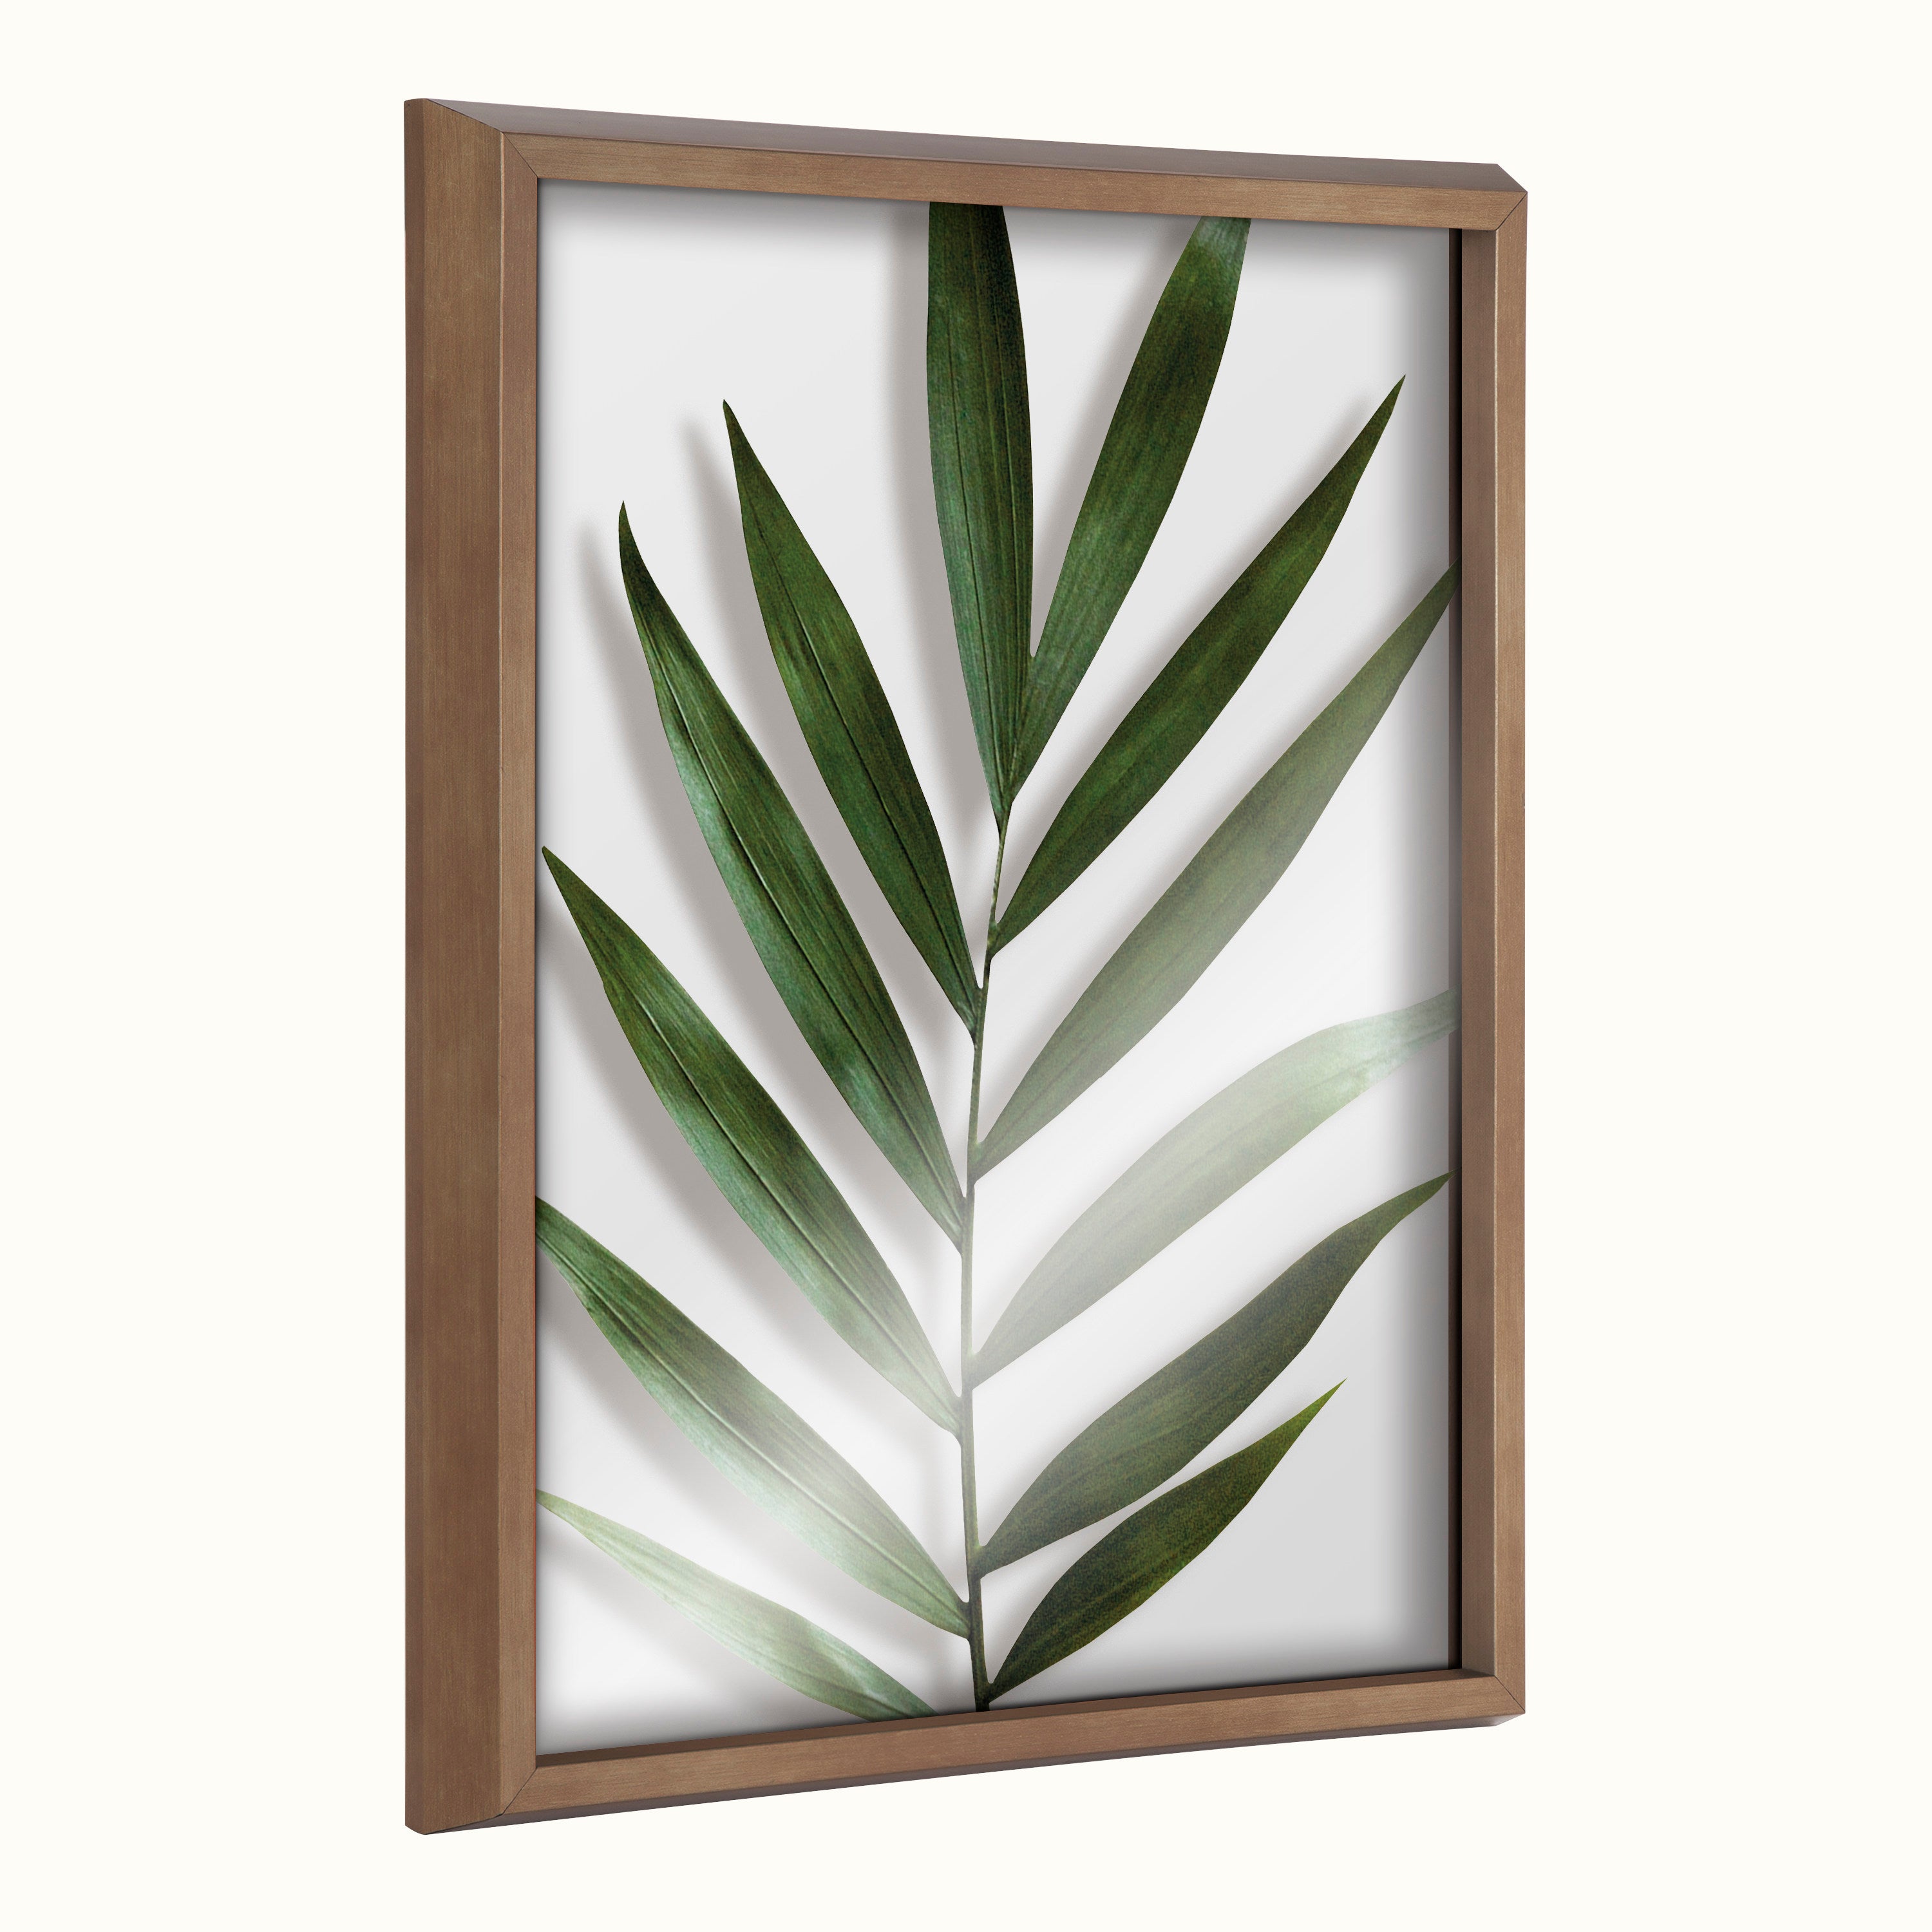 Blake Botanical 5F Framed Printed Glass by Amy Peterson